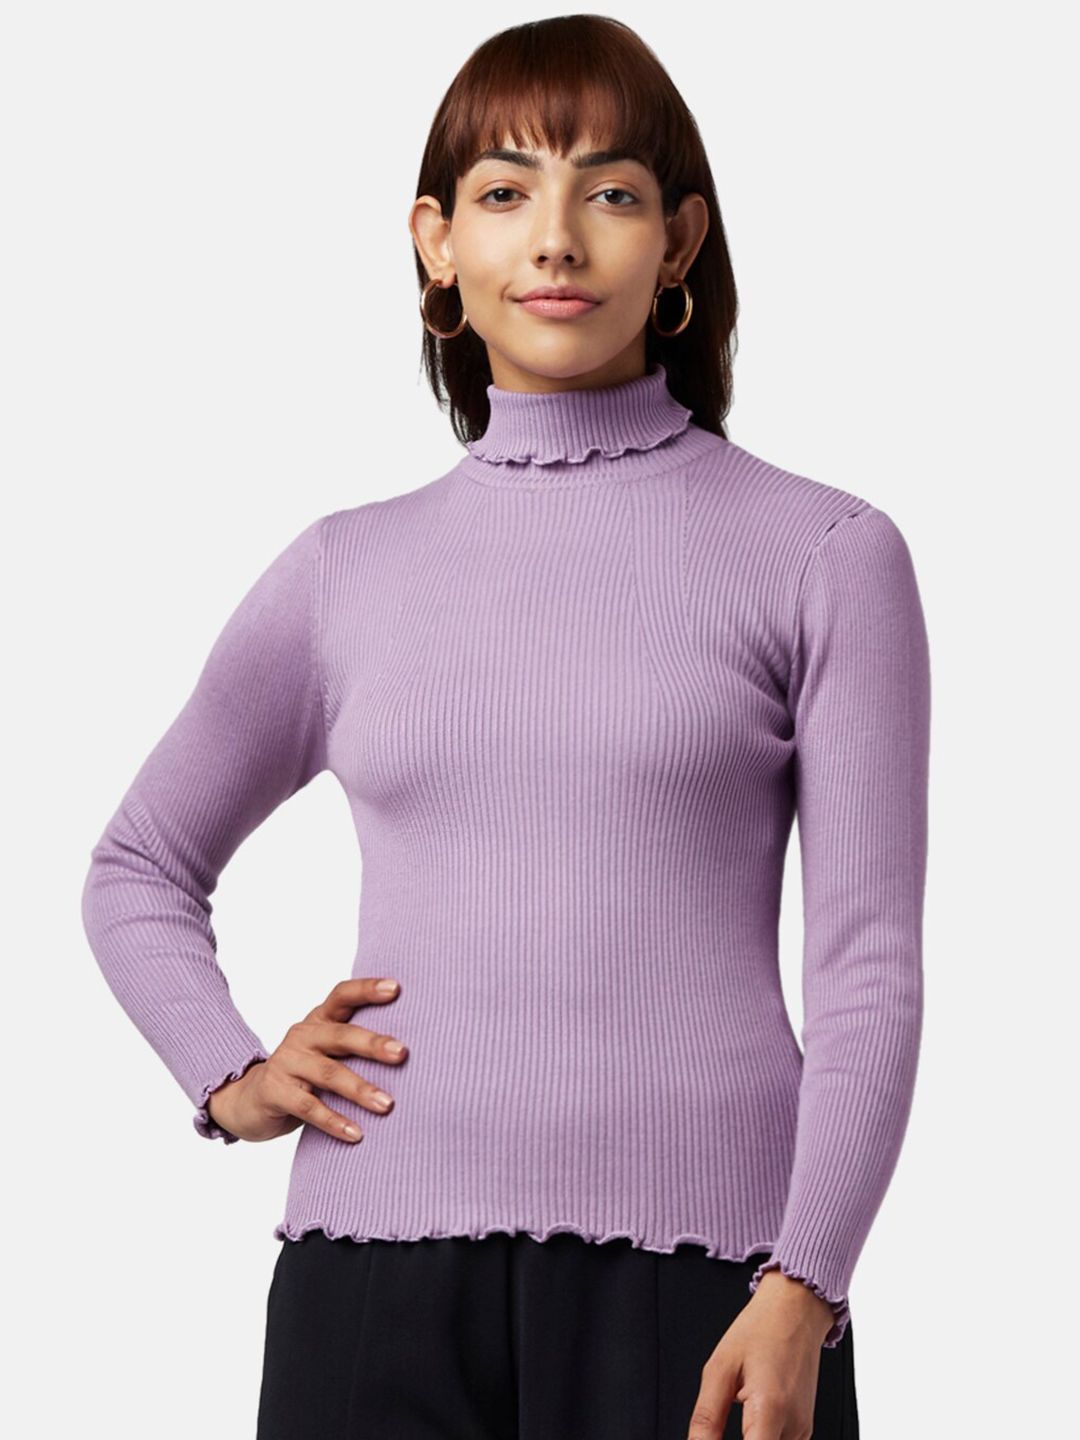 Honey by Pantaloons Lavender Solid Fitted Long Sleeves Top Price in India